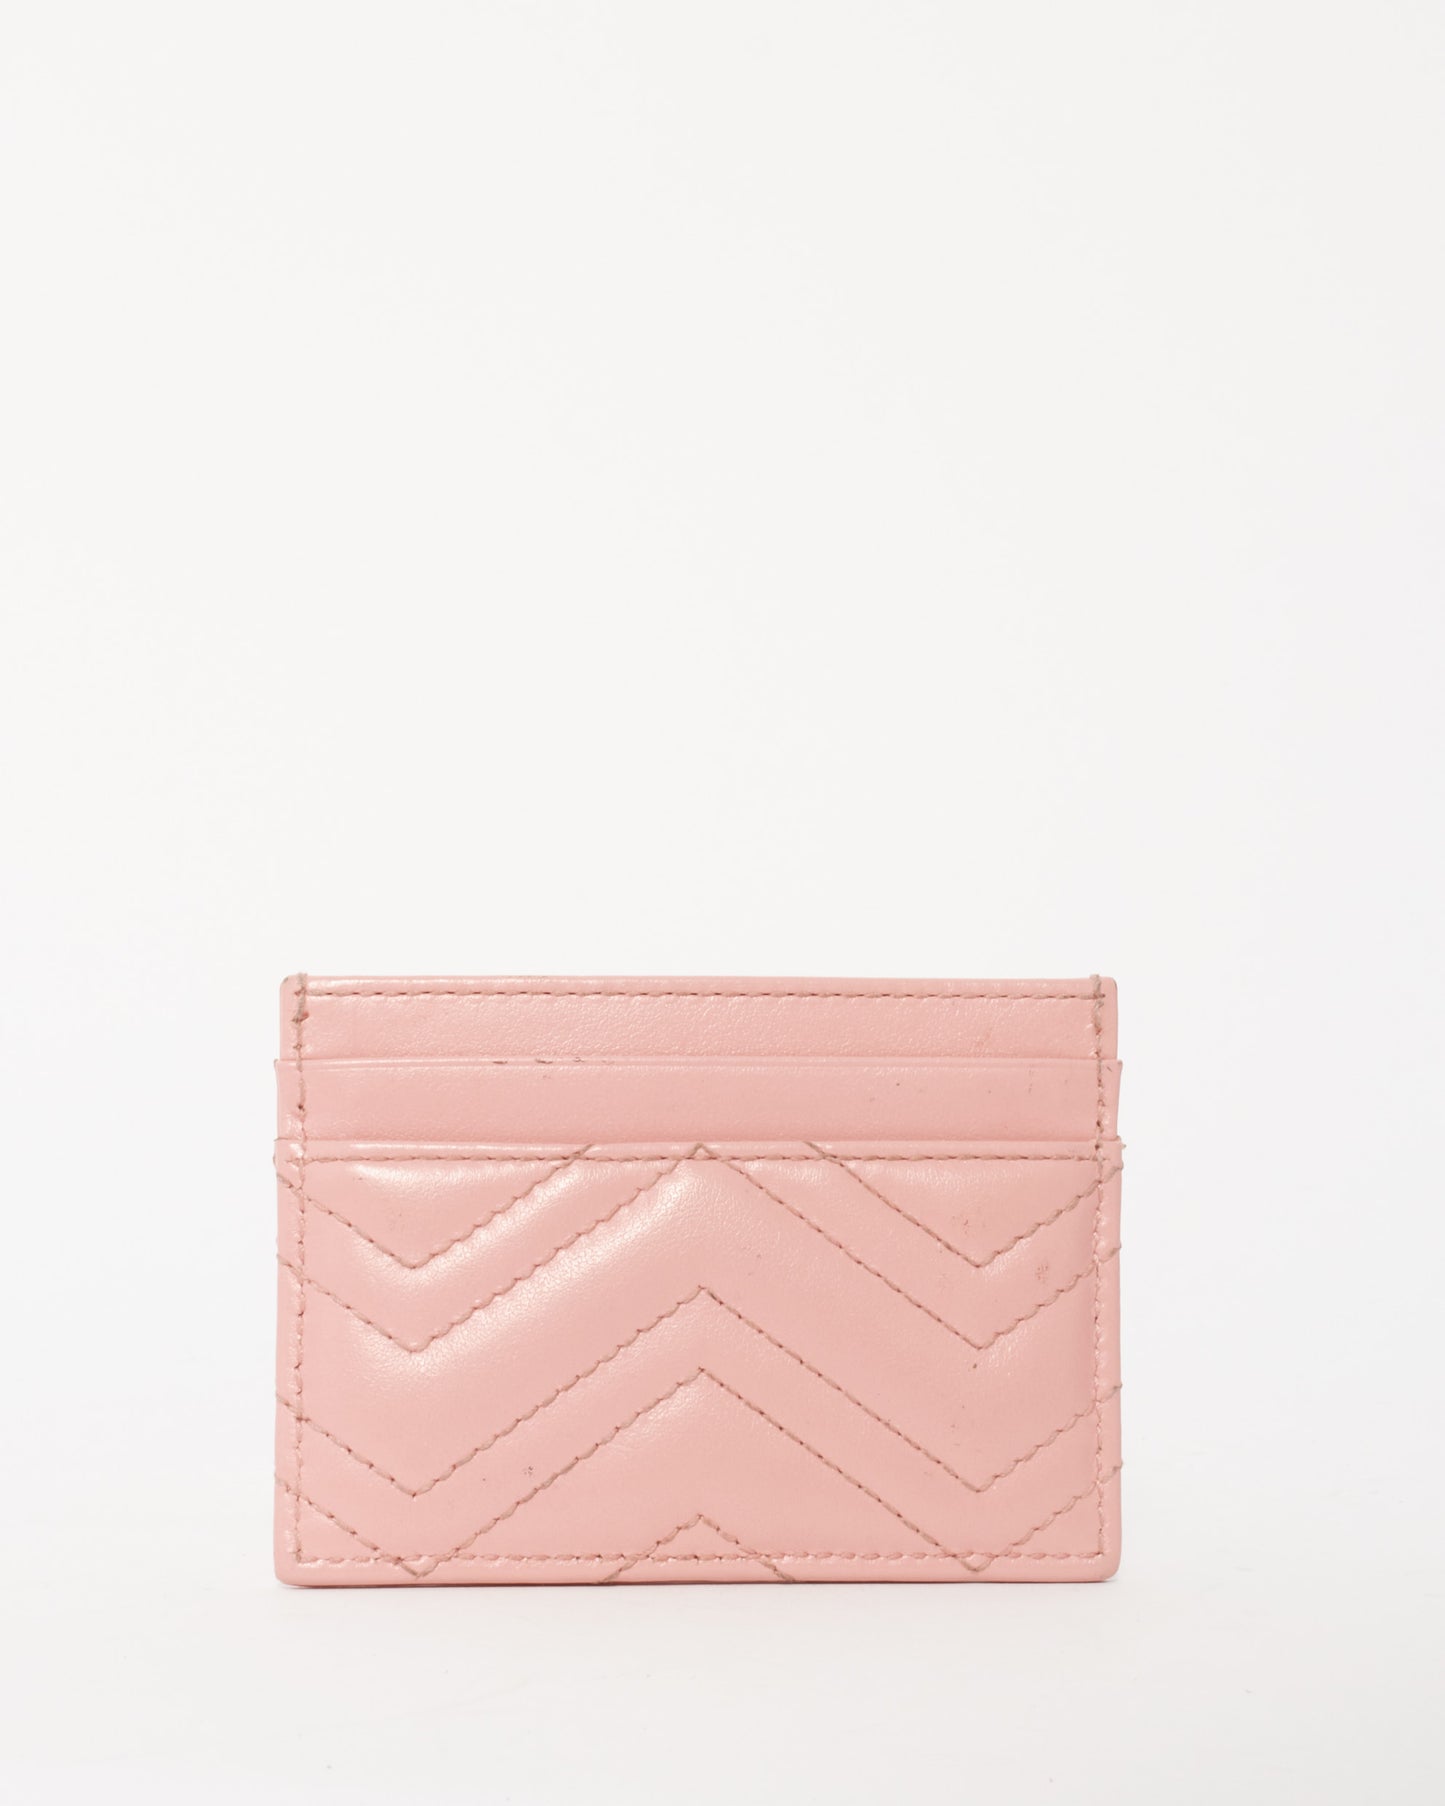 Gucci Pink Leather Marmont Card Holder